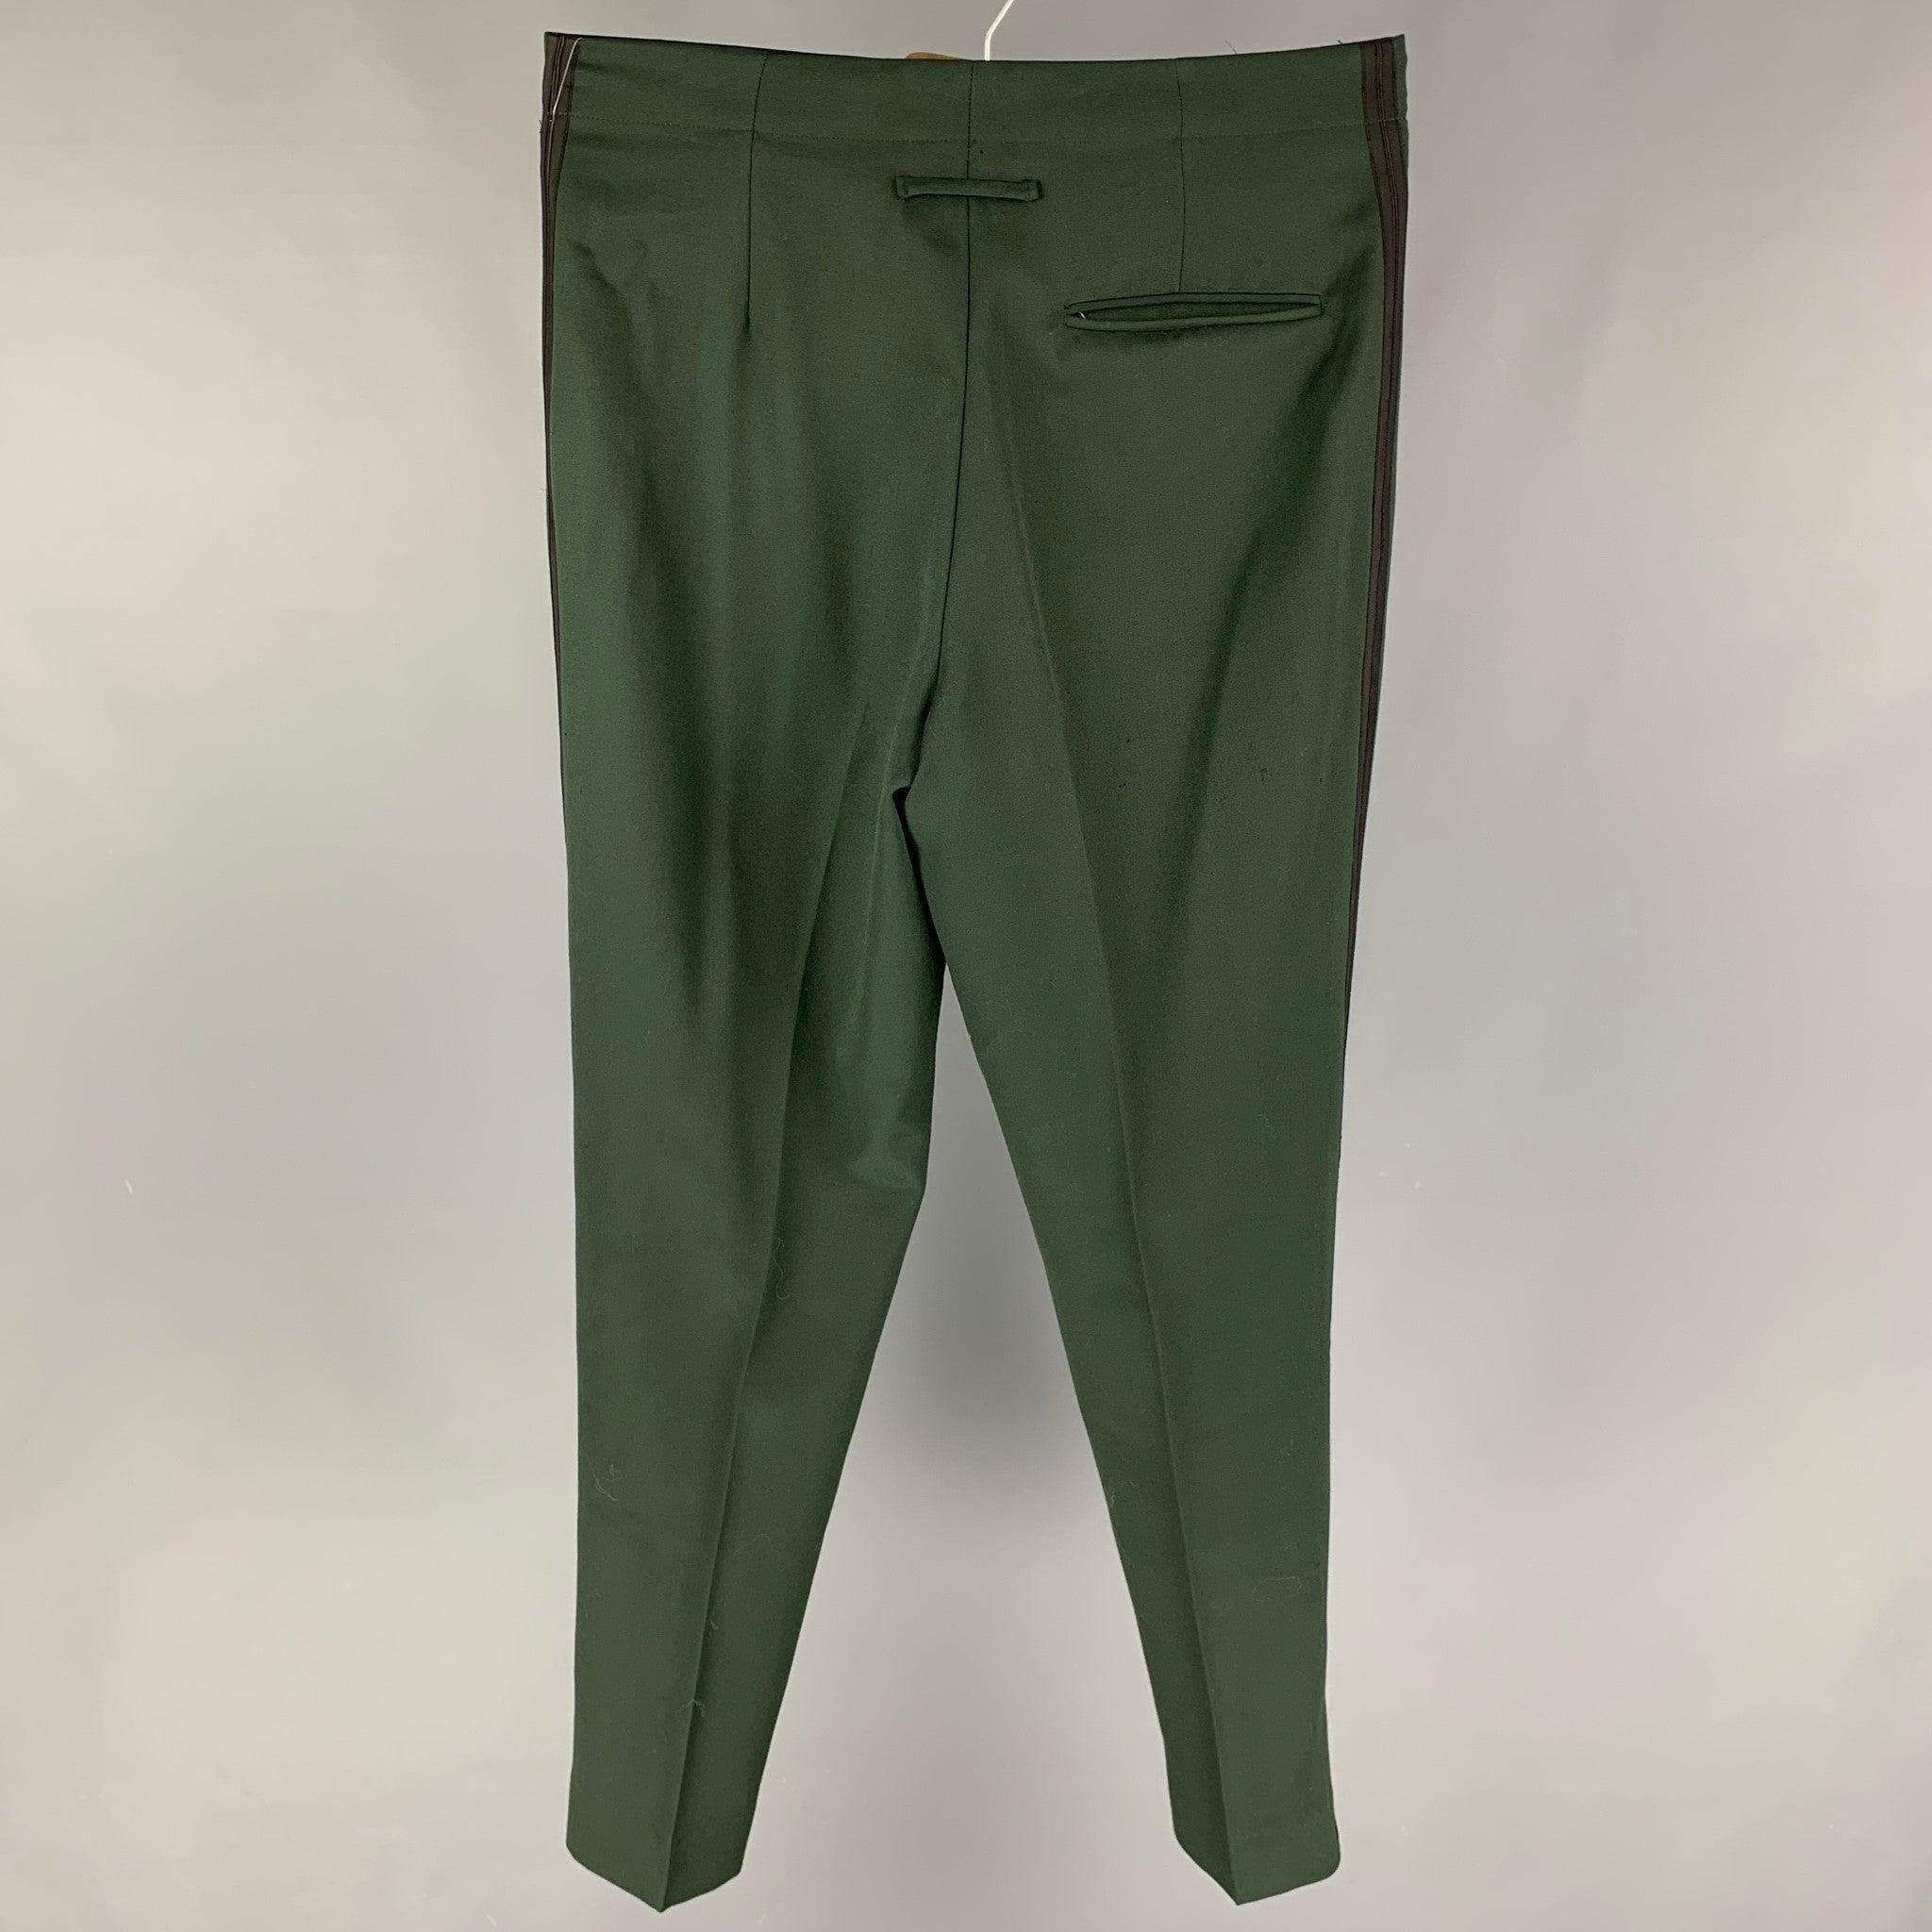 Vintage JEAN PAUL GAULTIER dress pants comes in a forest green material featuring a high waist, side stripe, front tab, and a zip fly closure. Made in Italy.
Good
Pre-Owned Condition. Minor tear at front. 

Marked:   50 

Measurements: 
  Waist: 34